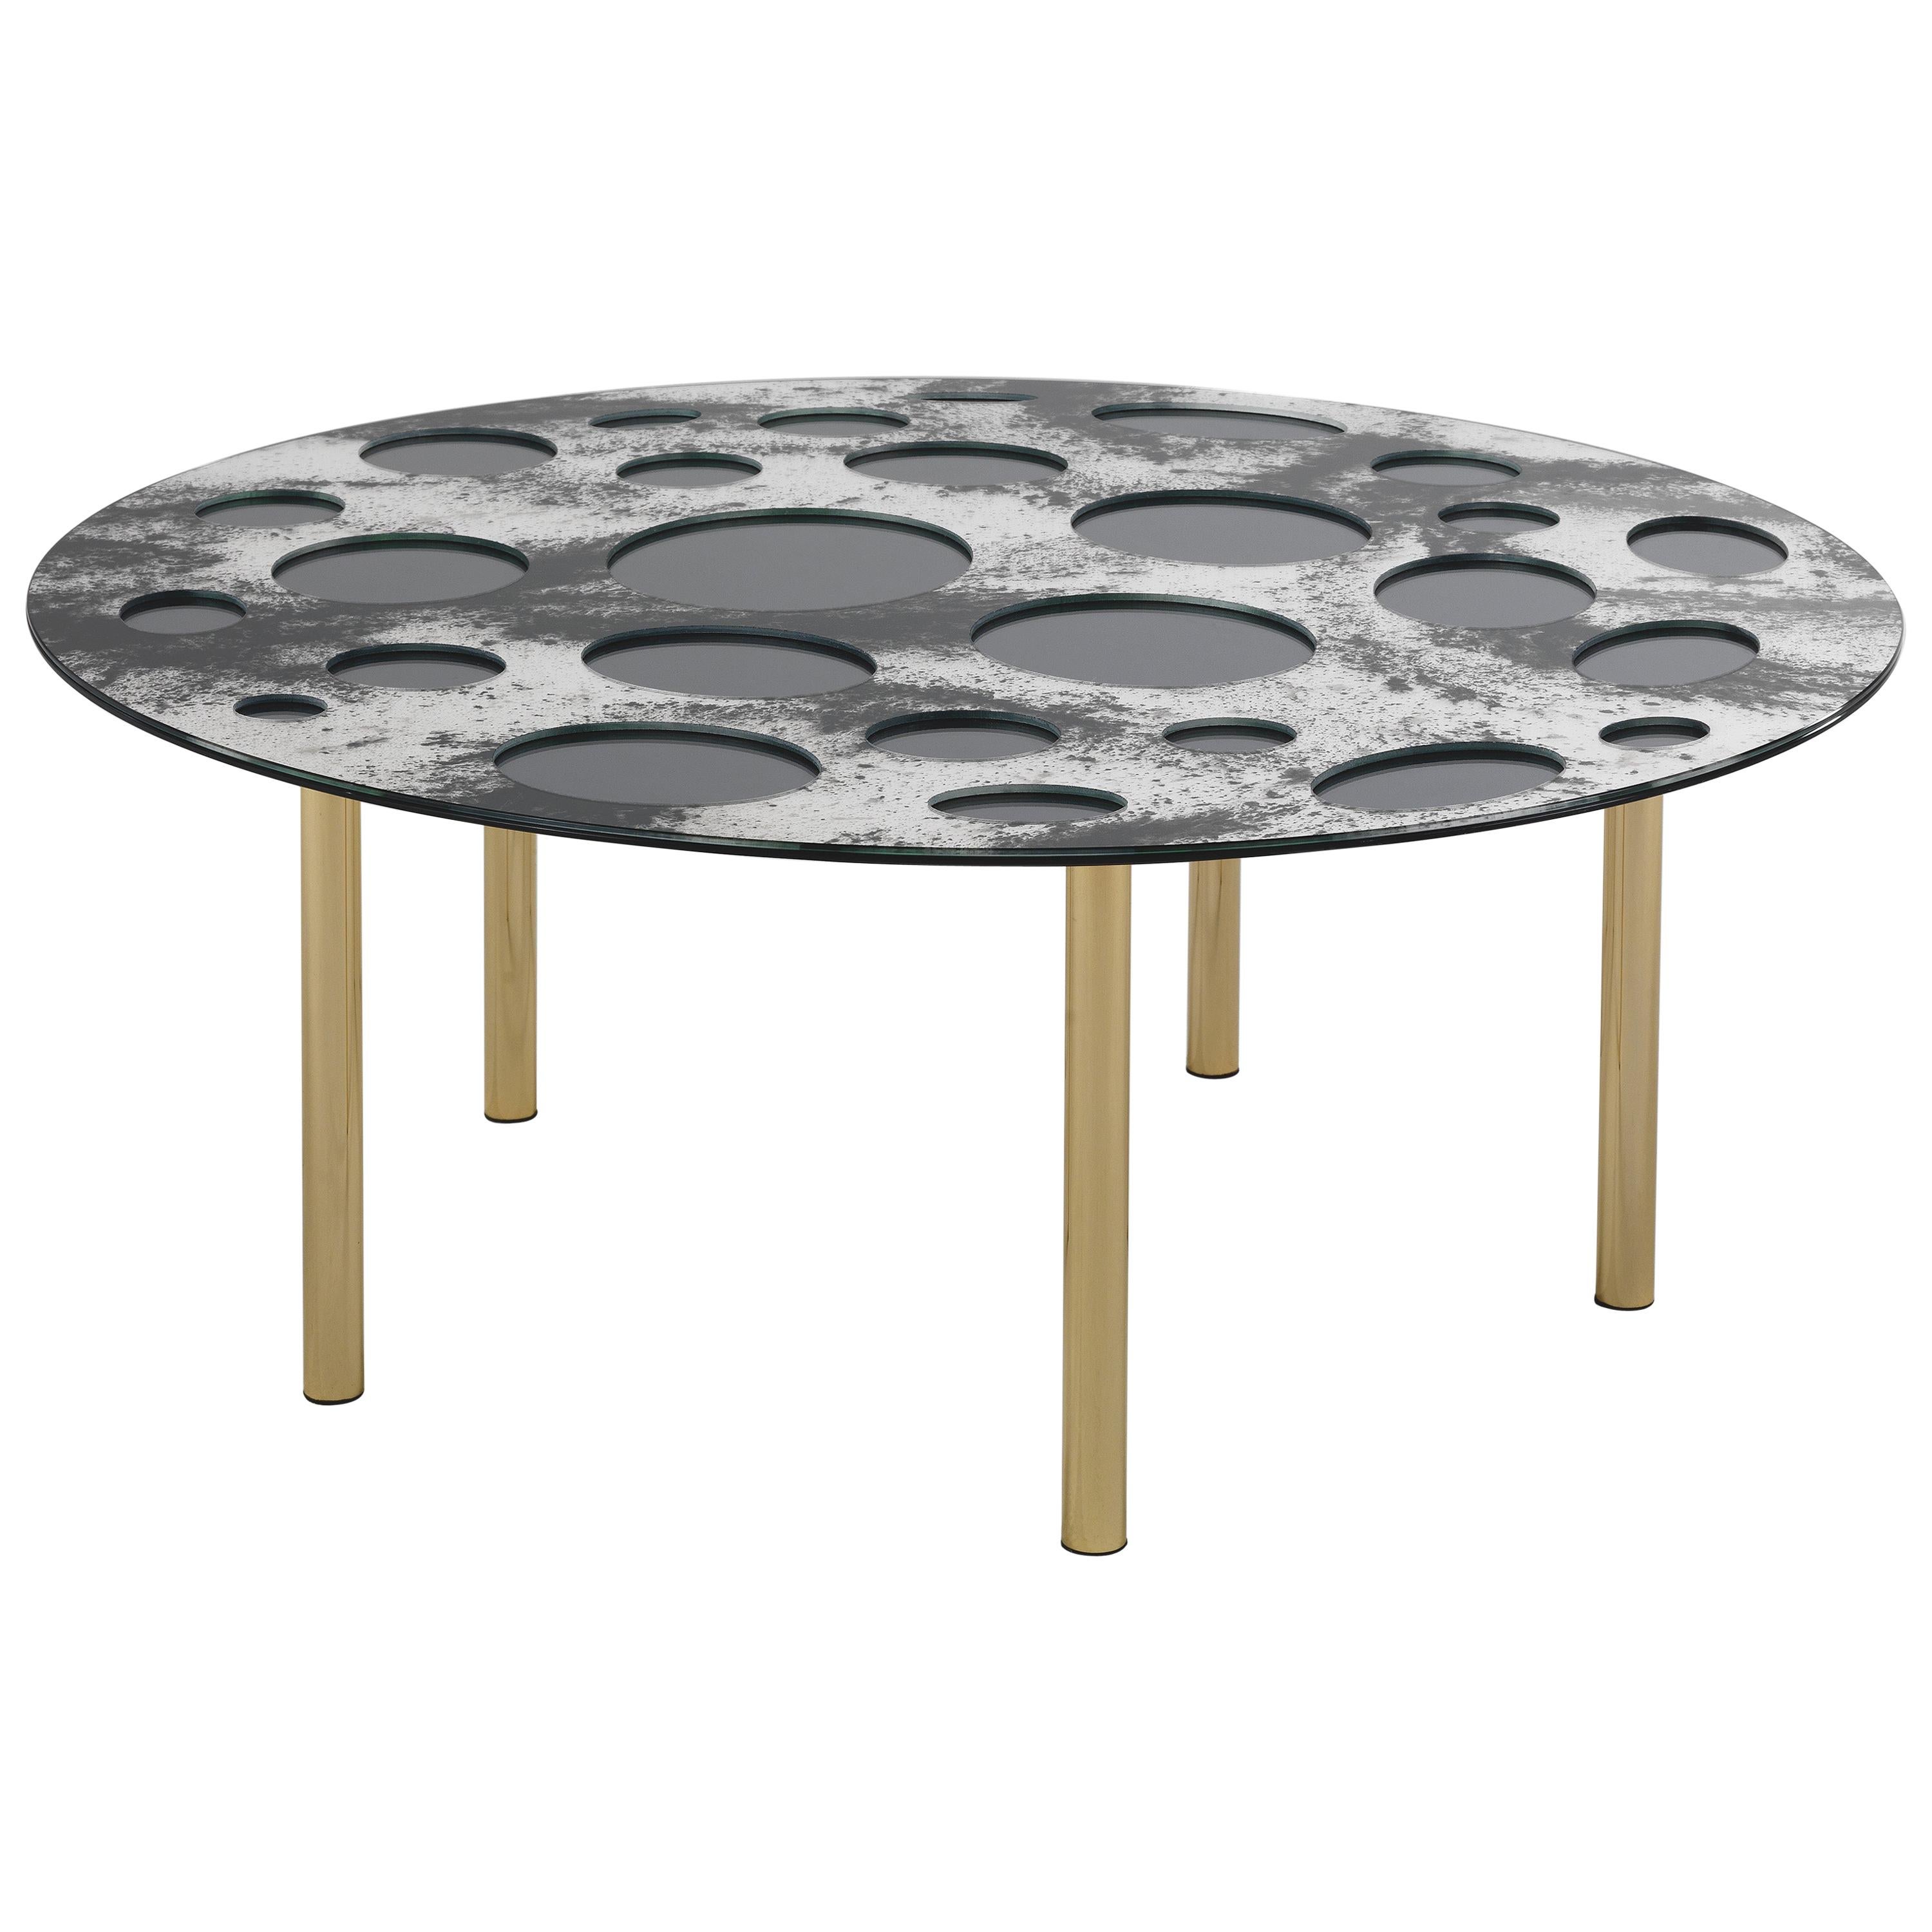 For Sale: Gray (Moon) 21st Century Venny Central Table in Decorative Mirror Layers by Matteo Cibic